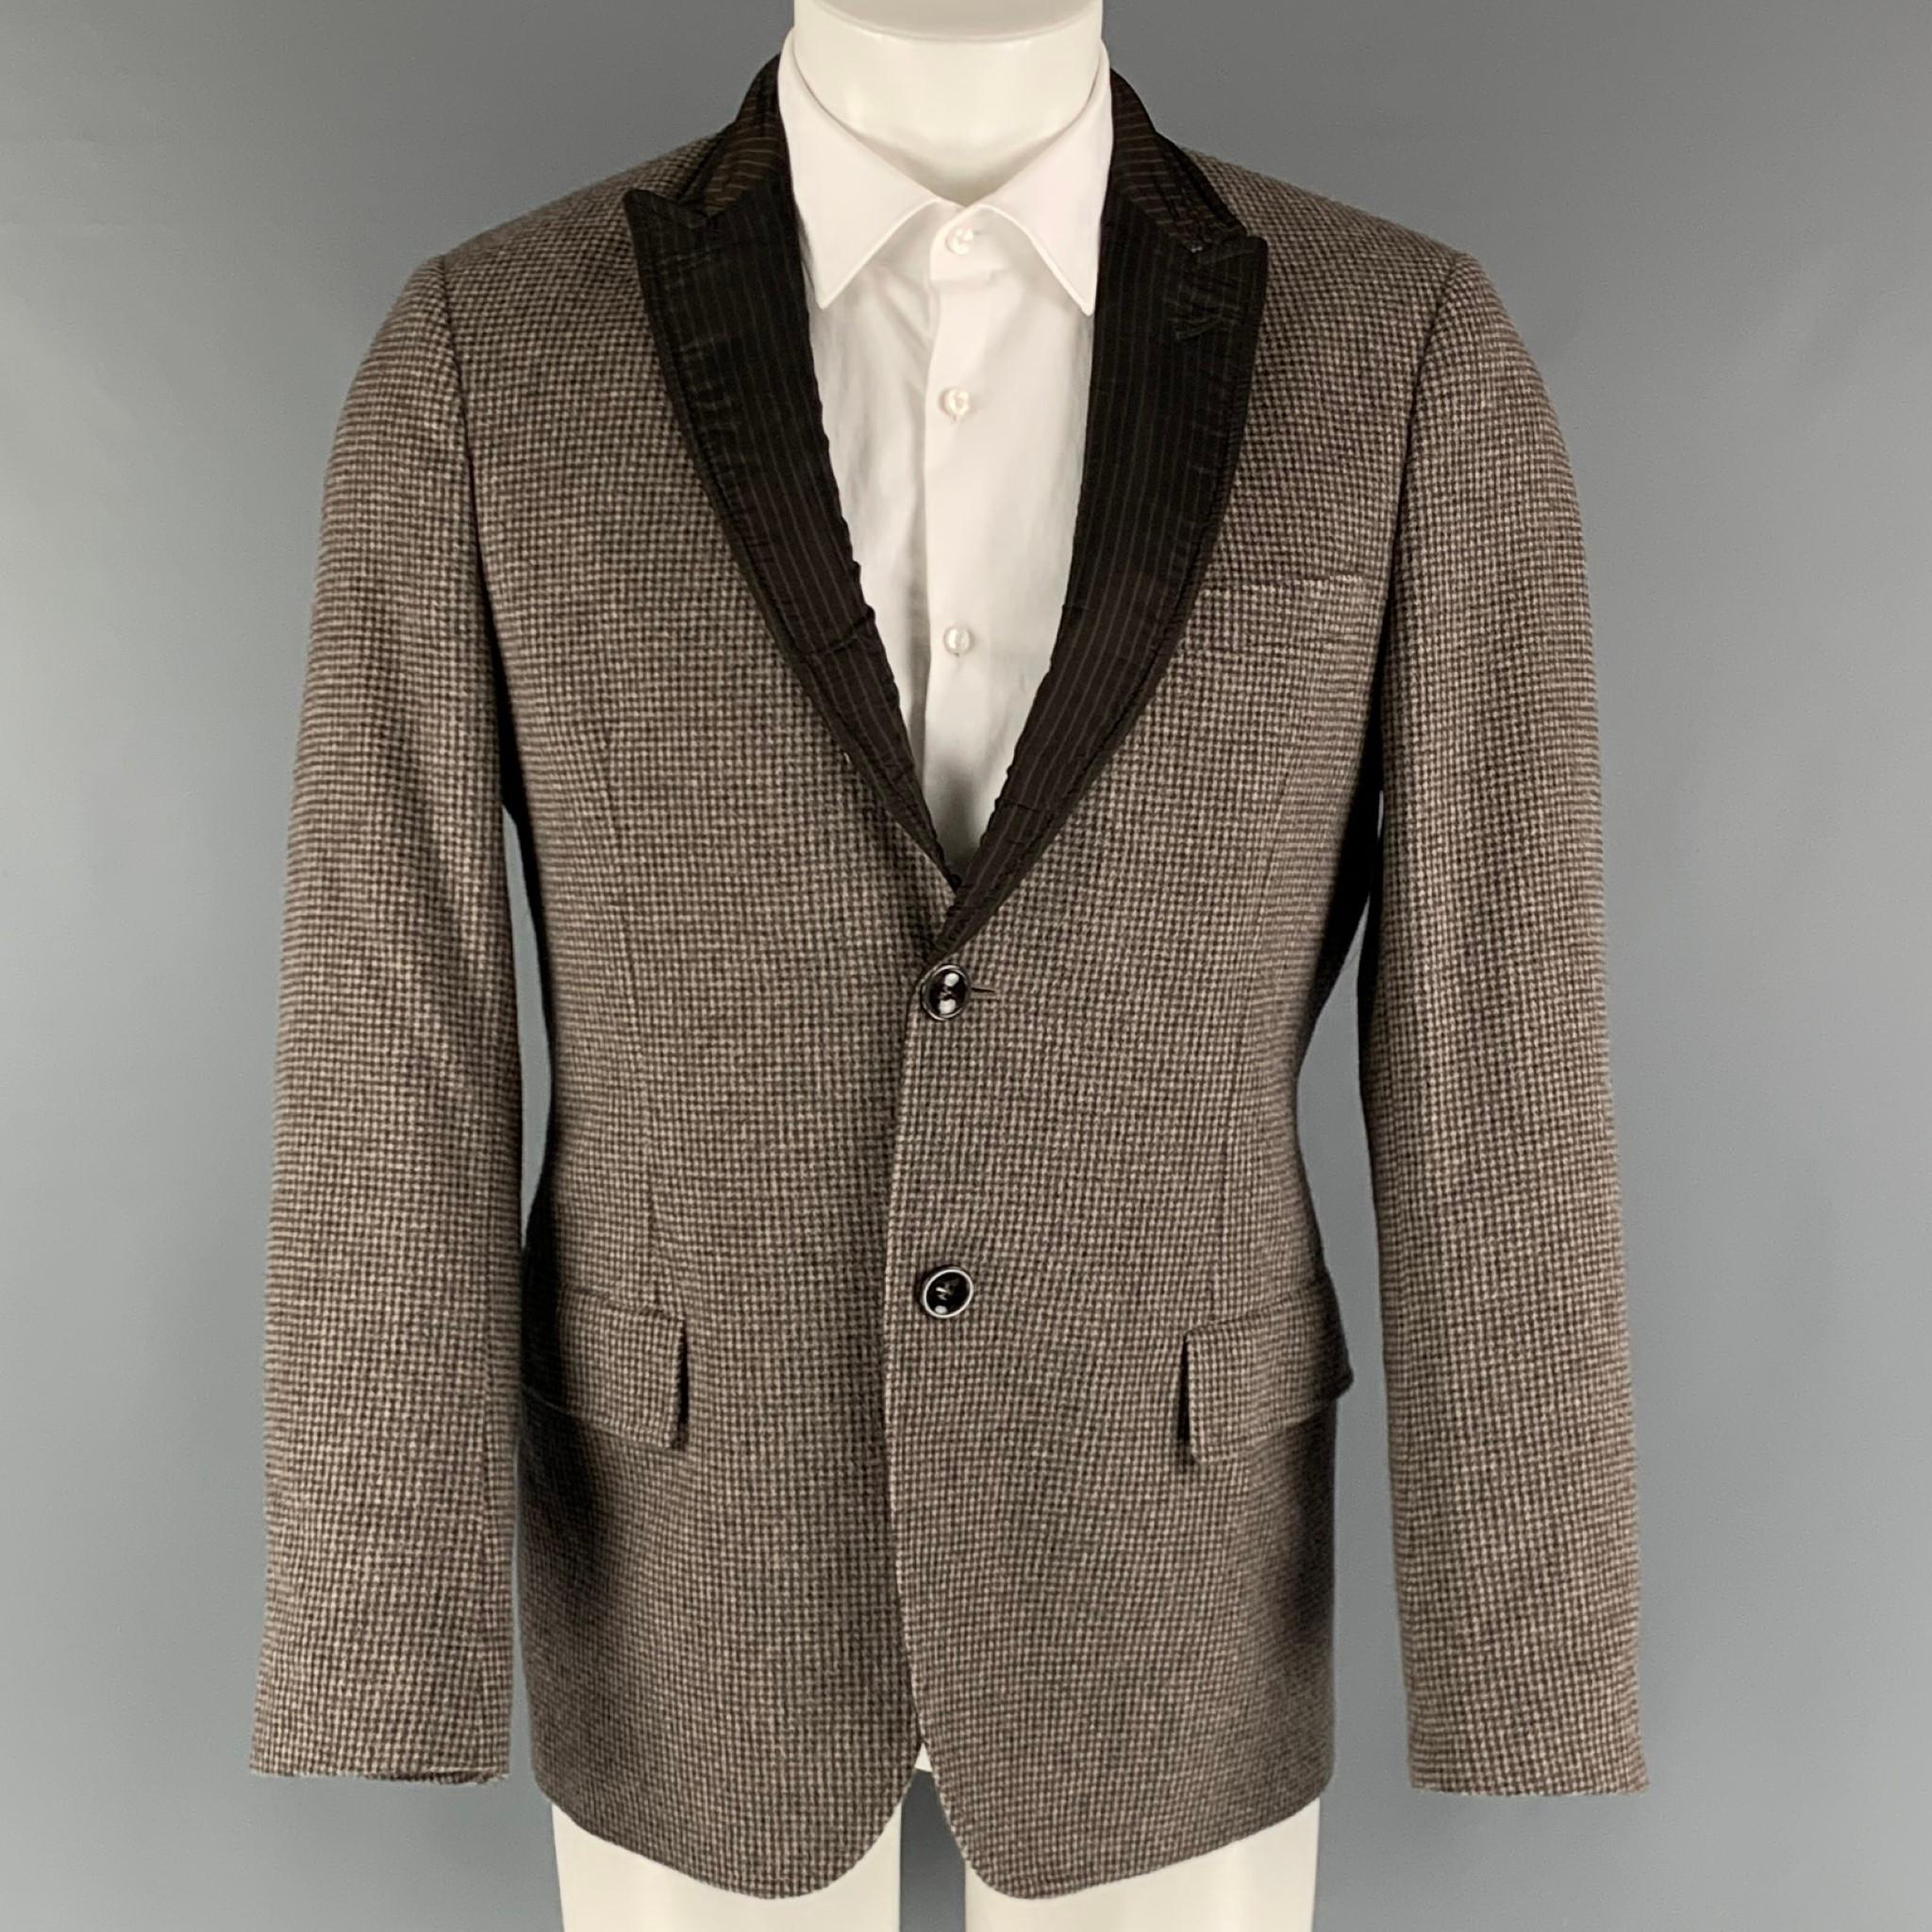 EMPORIO ARMANI sport coat comes in a brown, charcoal and grey checkered angora woven material with full lining featuring a peak lapel, patch pockets, and a two button closure. Made in Italy.

Excellent Pre-Owned Condition.
Marked: IT